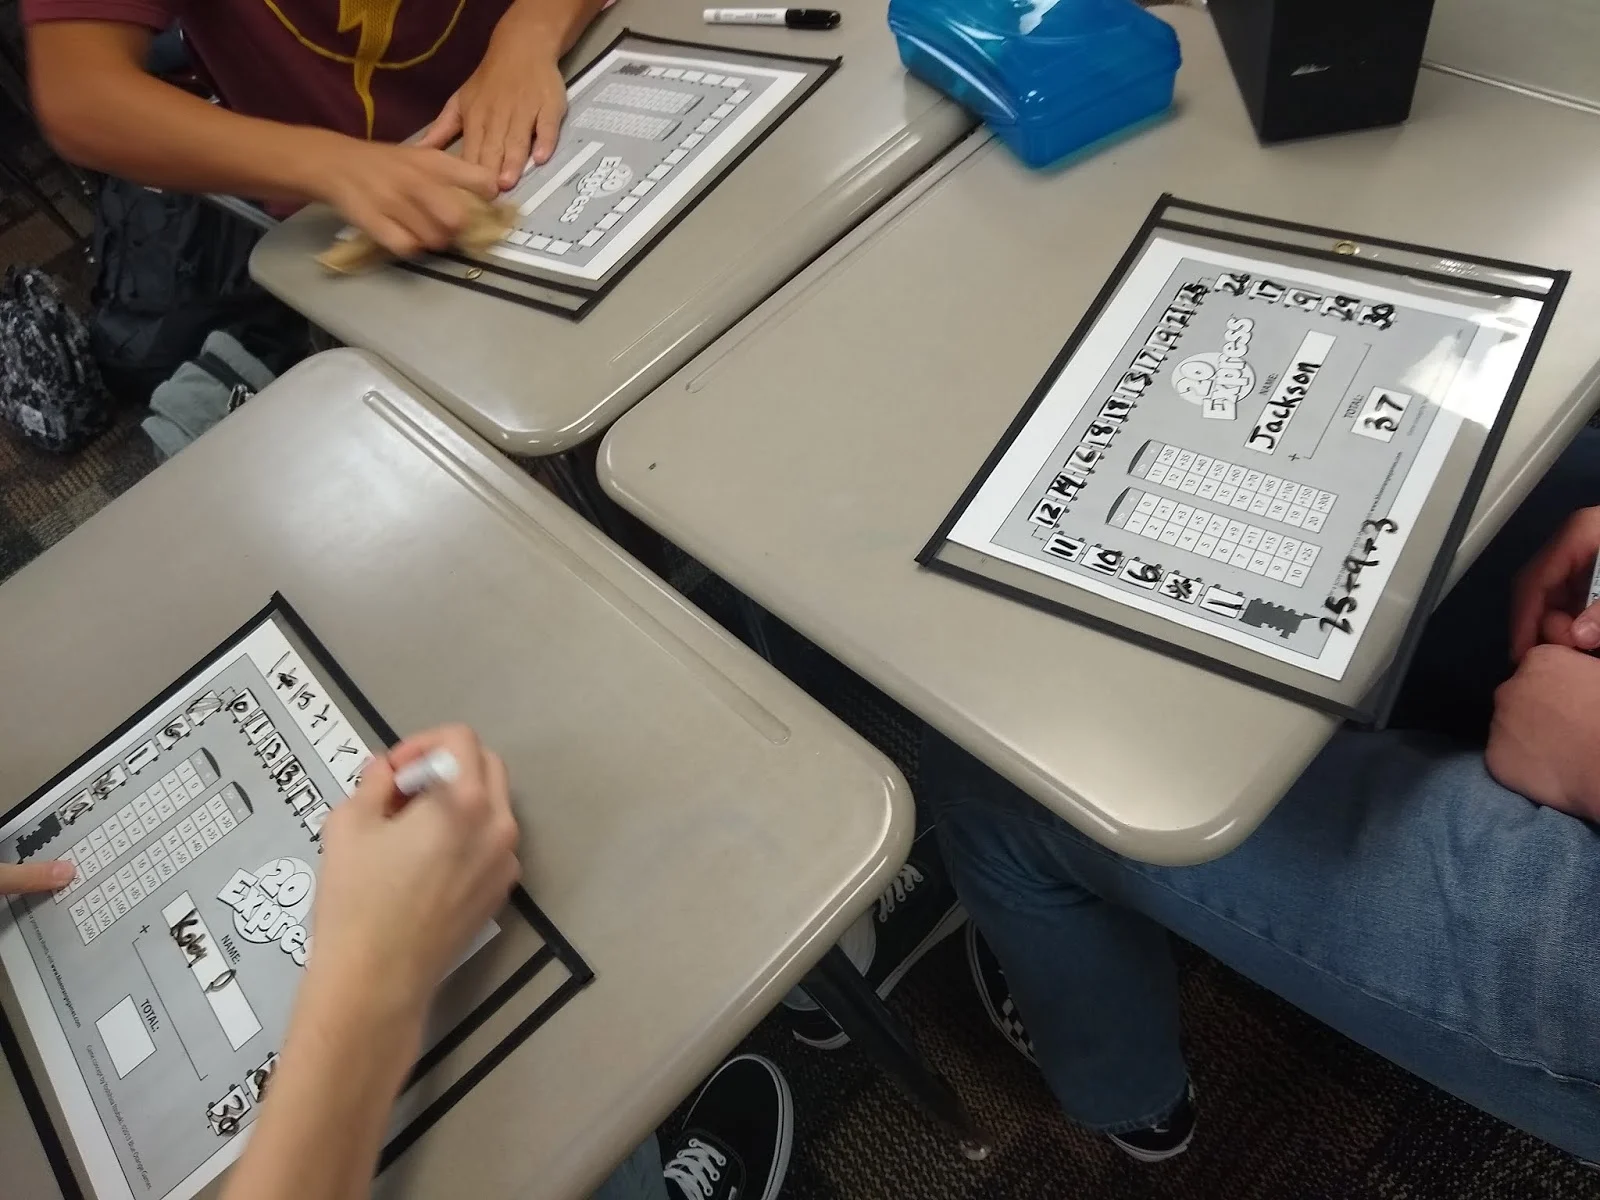 Train Game - Activity for First Week of School in Math Class (Based on 20 Express by Blue Orange Games)